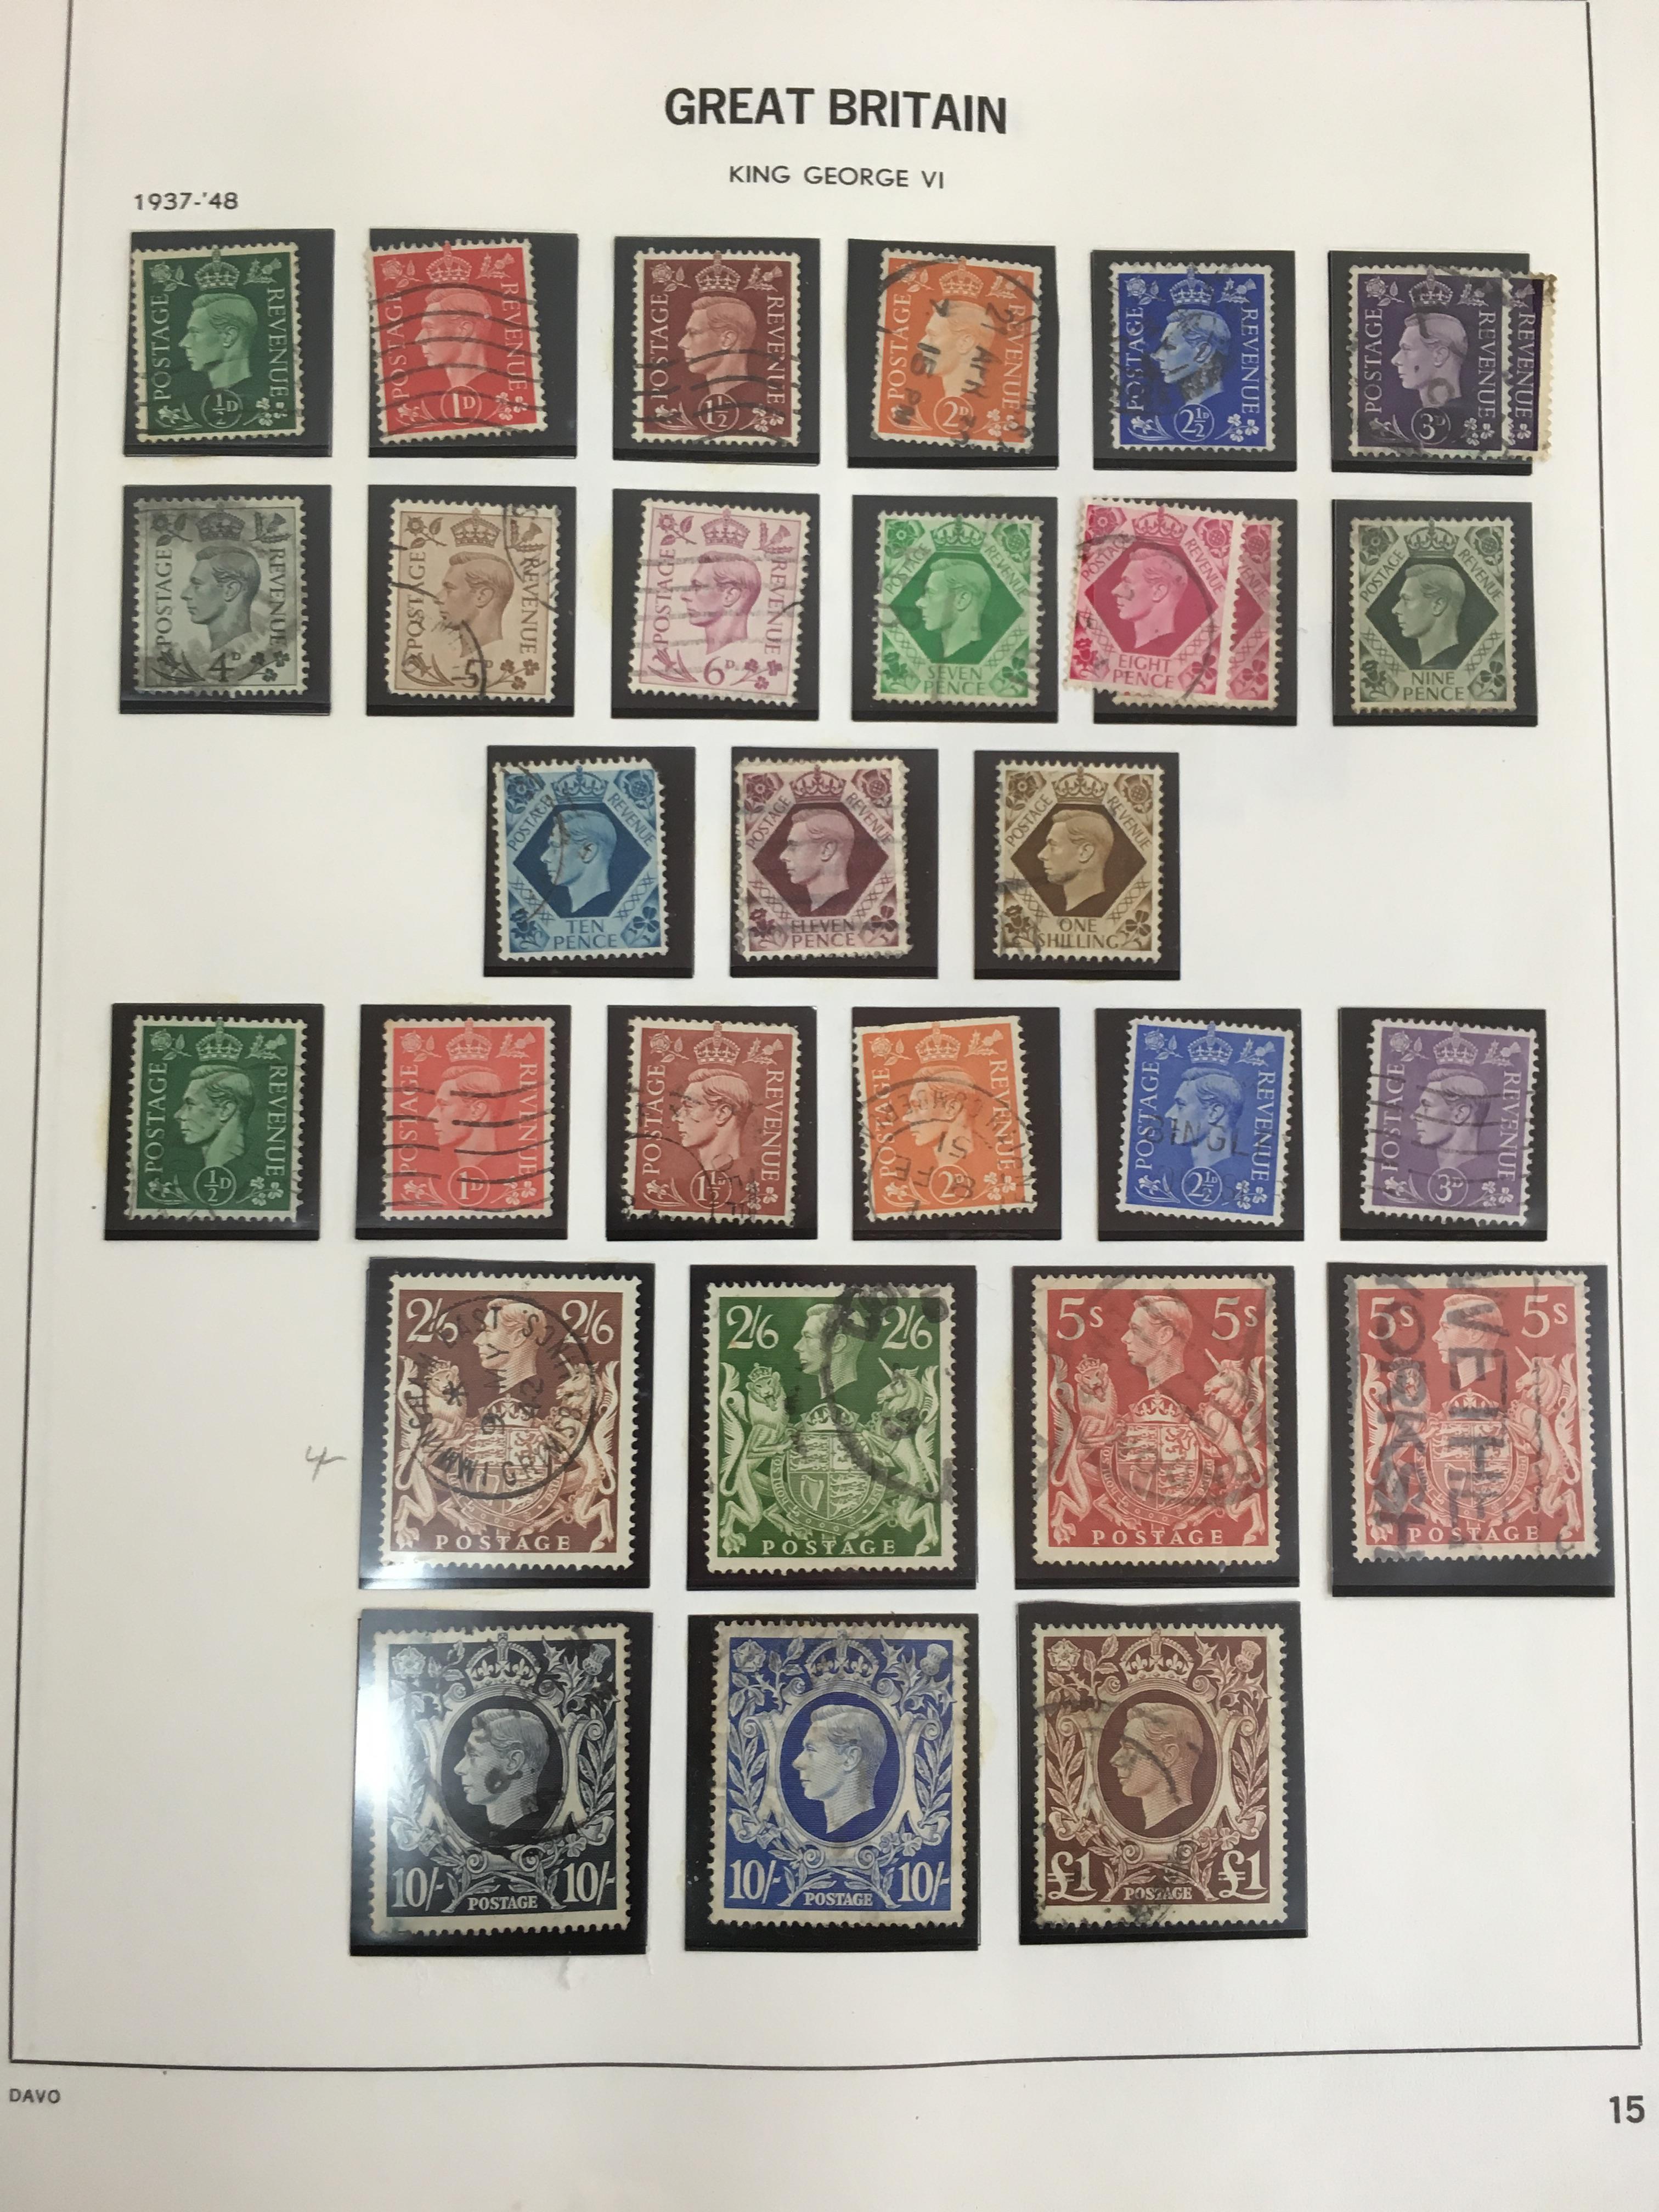 STAMPS: GB 1840-1970 USED COLLECTION IN A DAVO ALBUM FROM 1d BLACK, 1d RED PLATES, EDWARD 7th 2/6, - Image 14 of 16